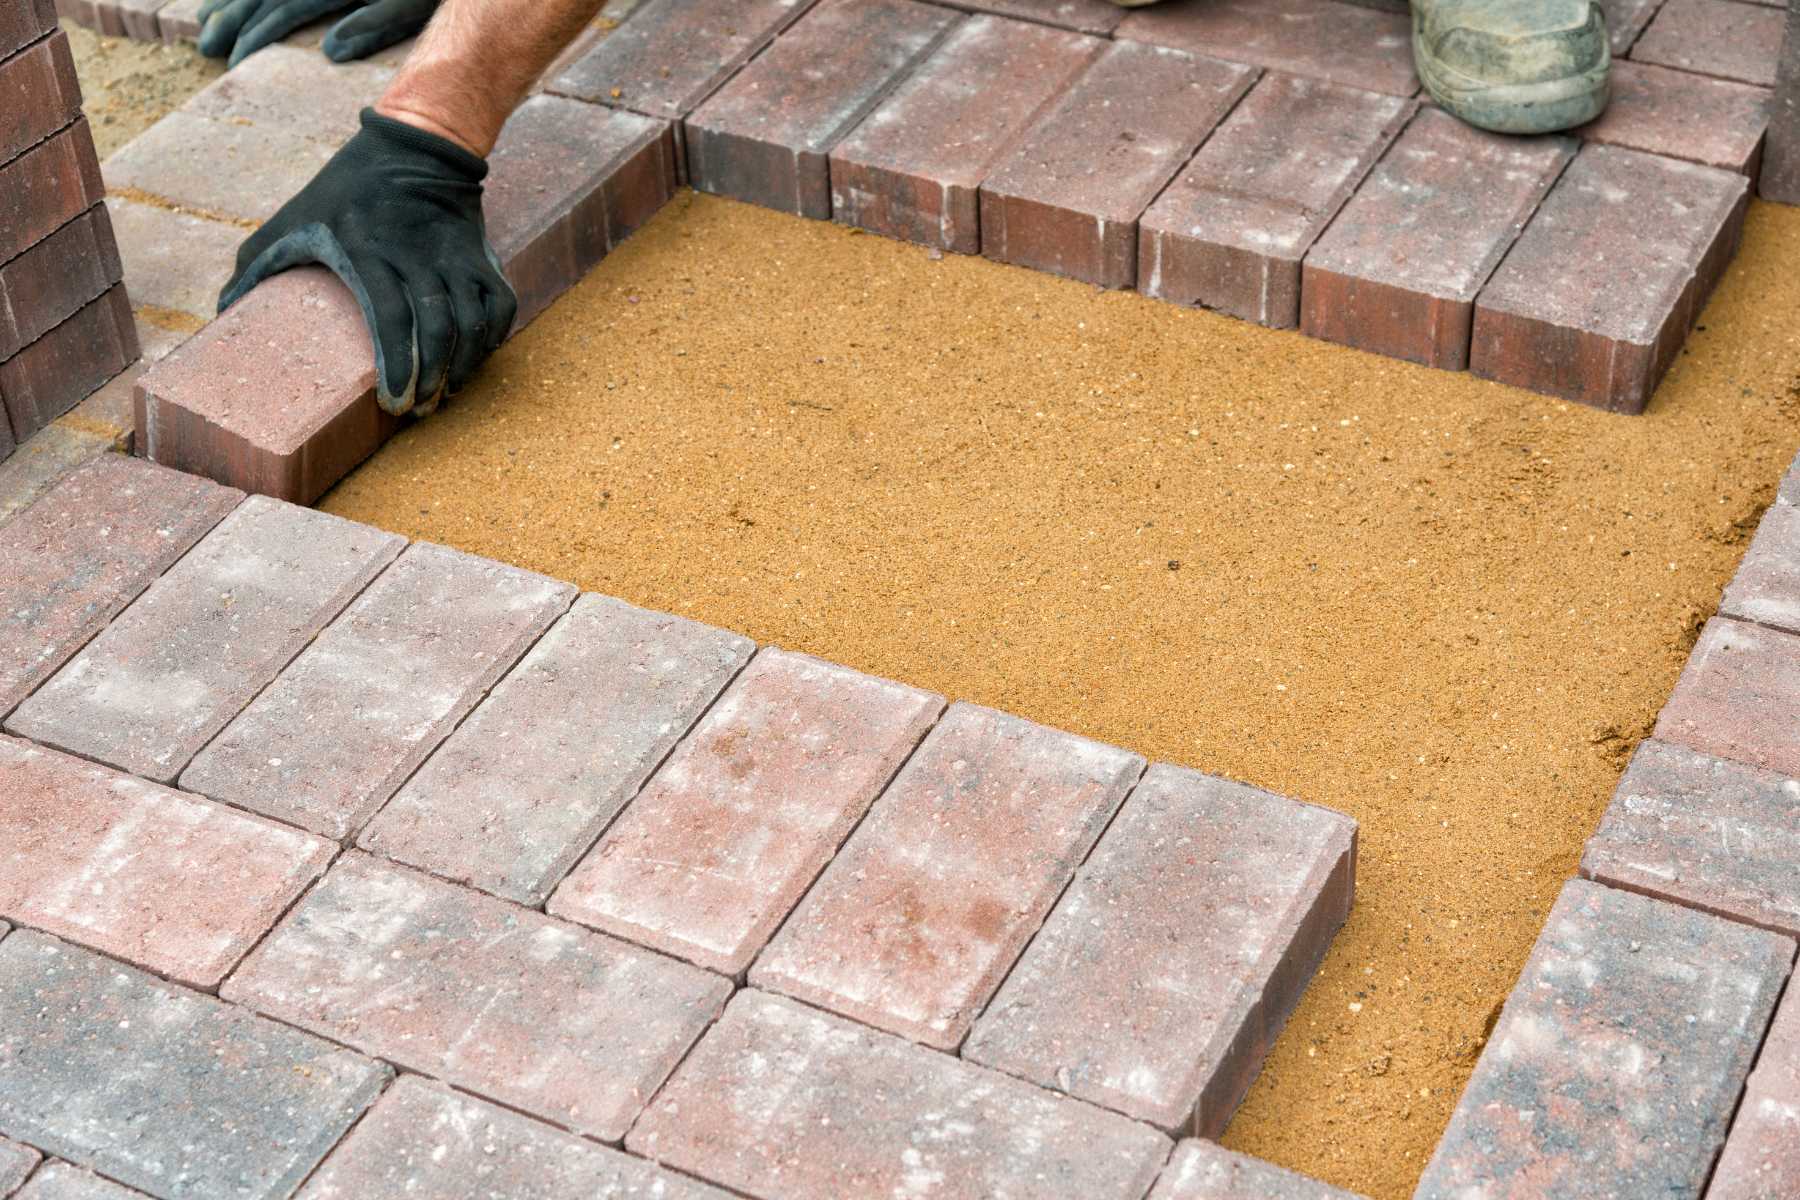 How To Lay Block Paving (Do's & Don'ts)